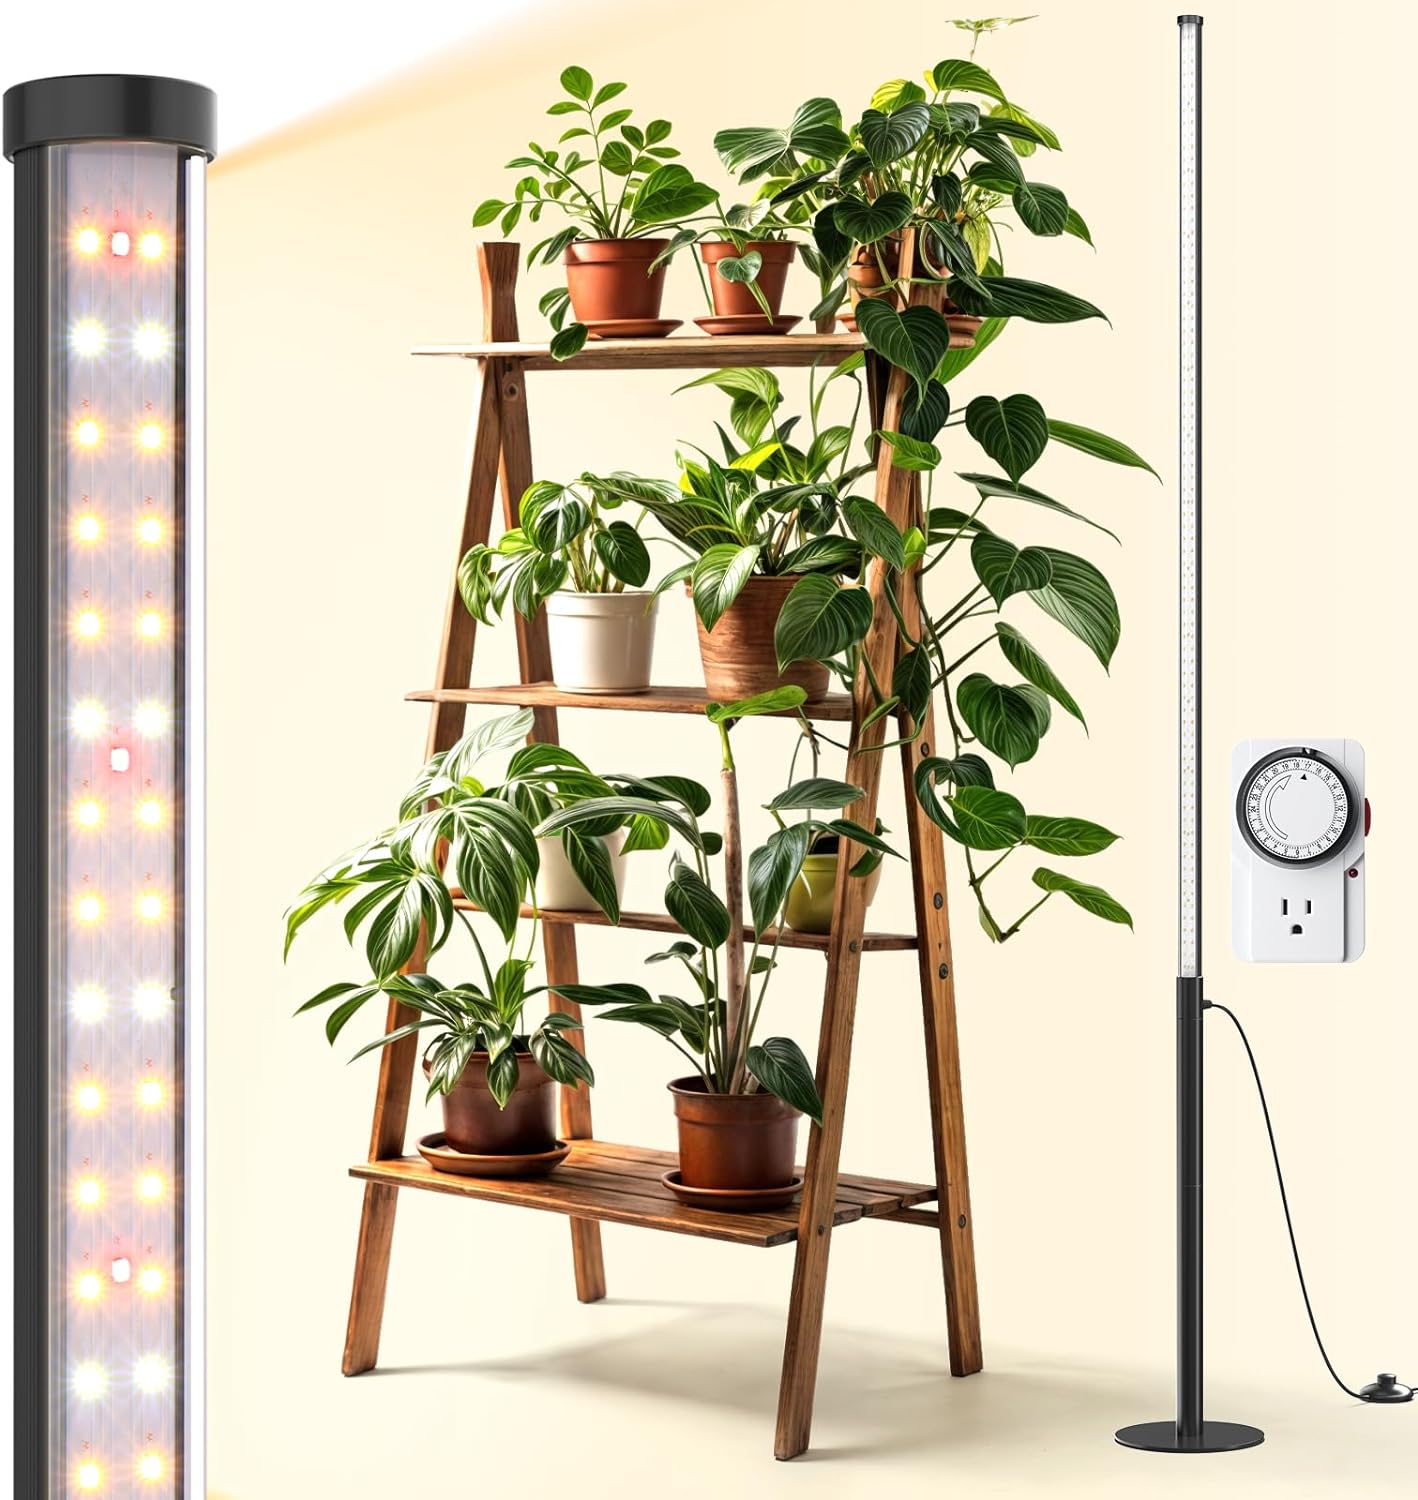 Accessories (Stand+ Extension + Timer) 1 Set, for T10 LED Grow Light with,4FT to 5.6FT